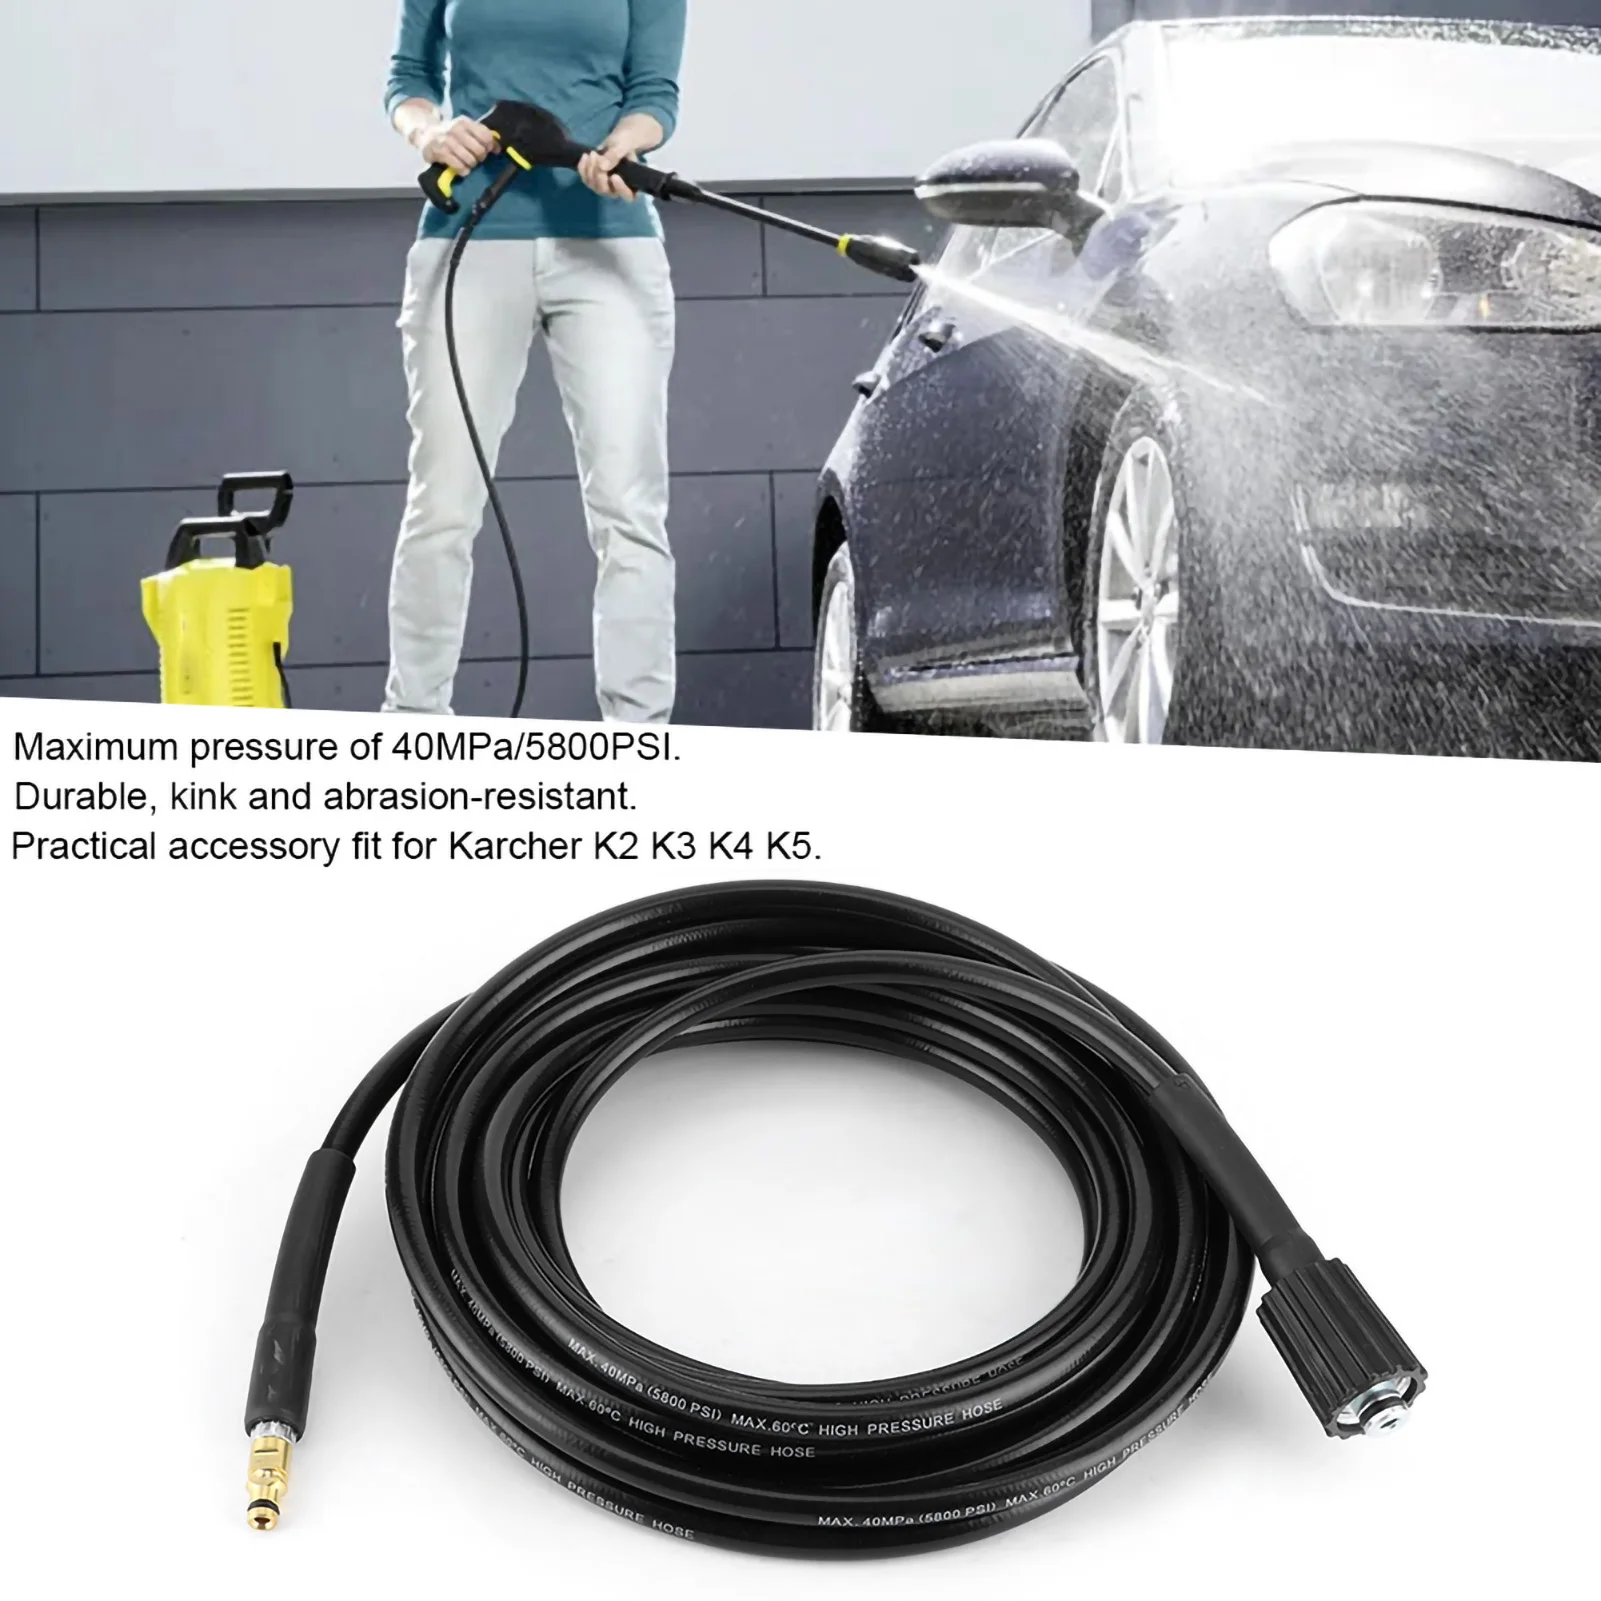 

6-15m 40MPa/5800PSI Auto Washer Hose High Pressure Water Cleaning Rubber Pipe Fit for Karcher K2 K3 K4 K5 Car Cleaning Accessory